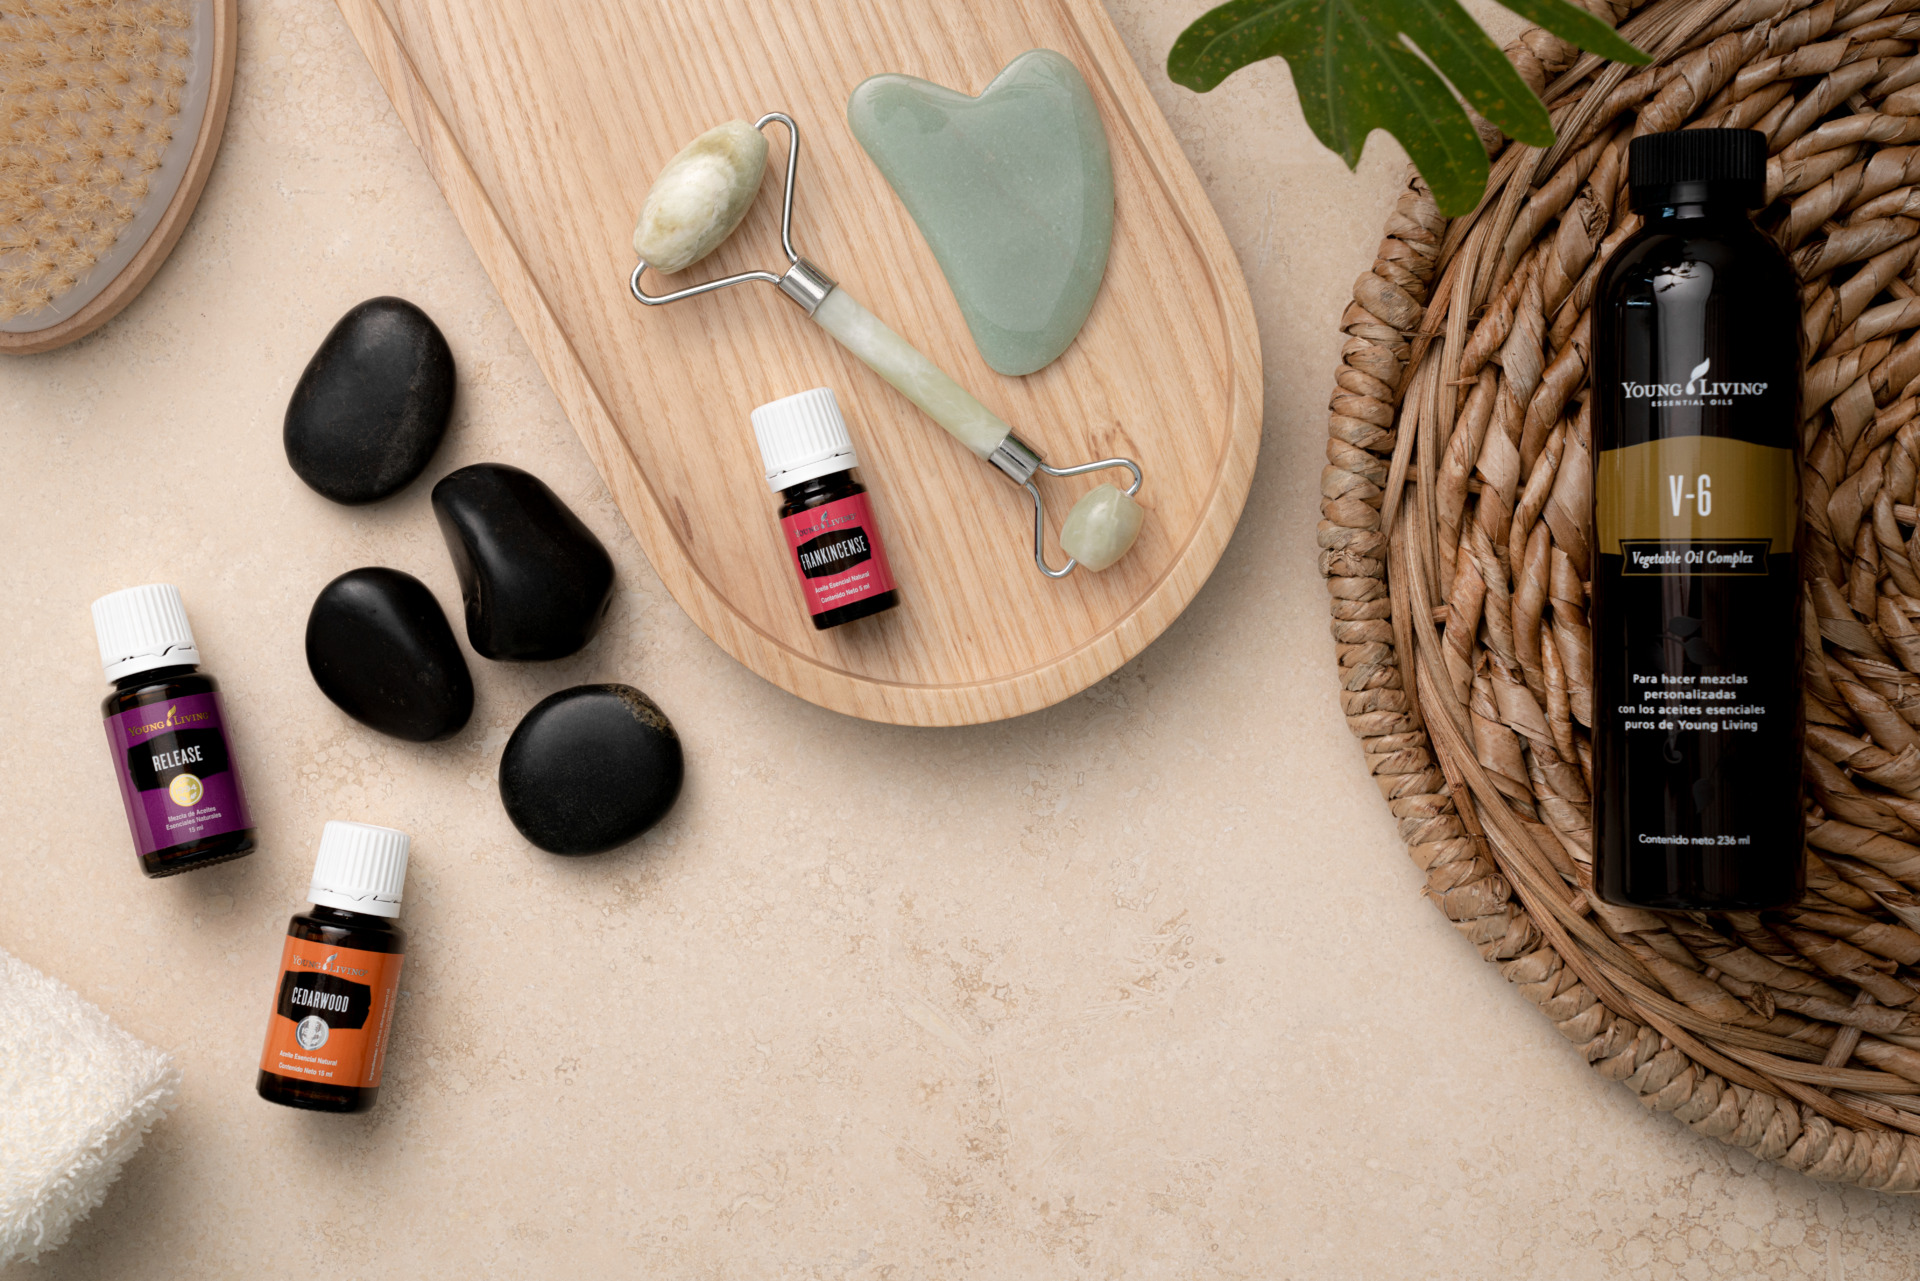 Spa day with essential oils